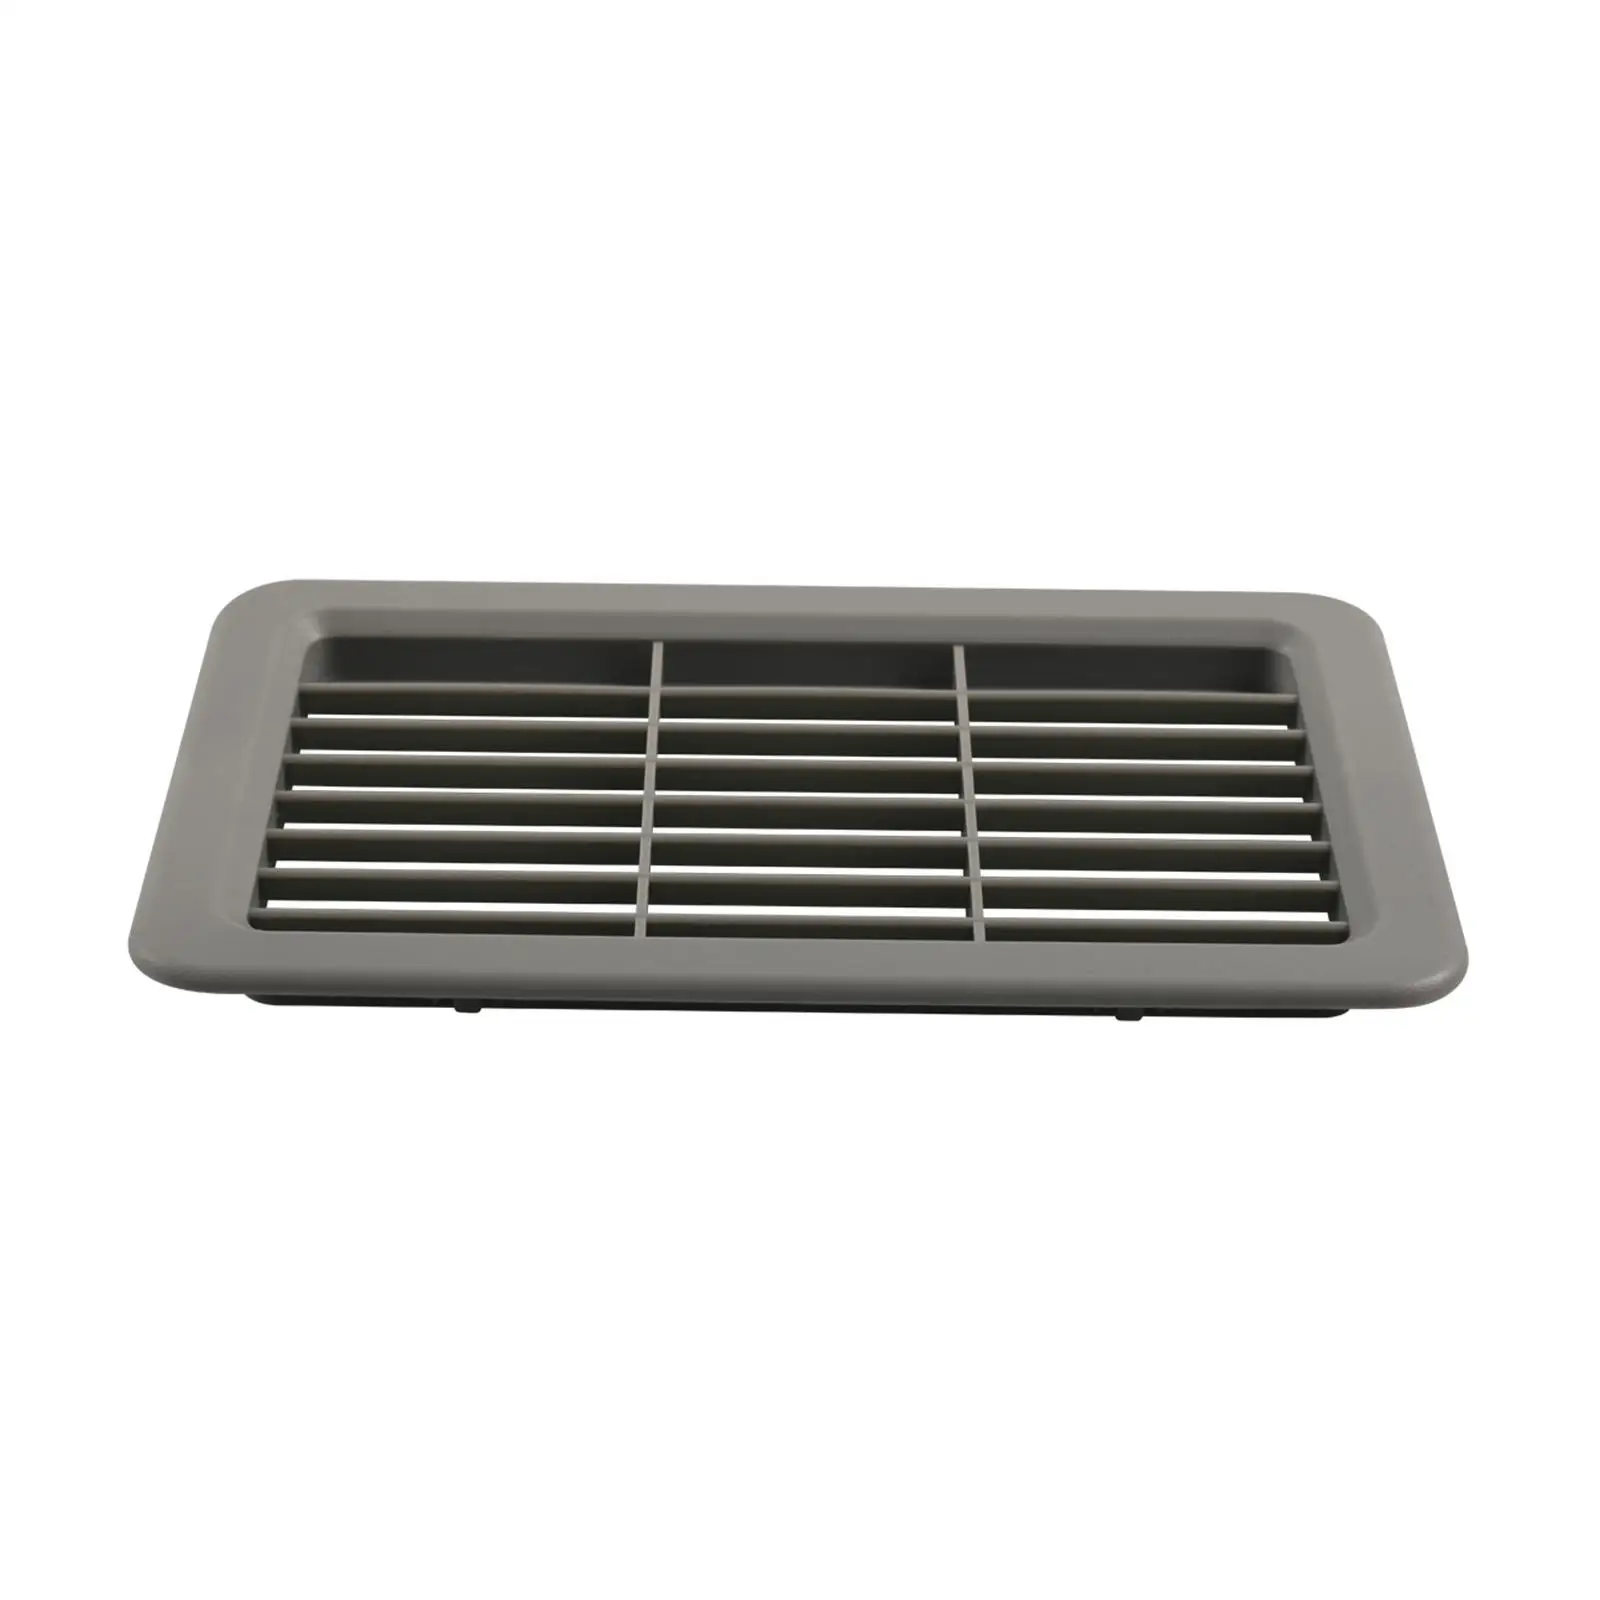 Air Vent Panel Easily Install Easy to Install High Performance Replace Parts for Camping Trailer Traveling Camper Motorhome